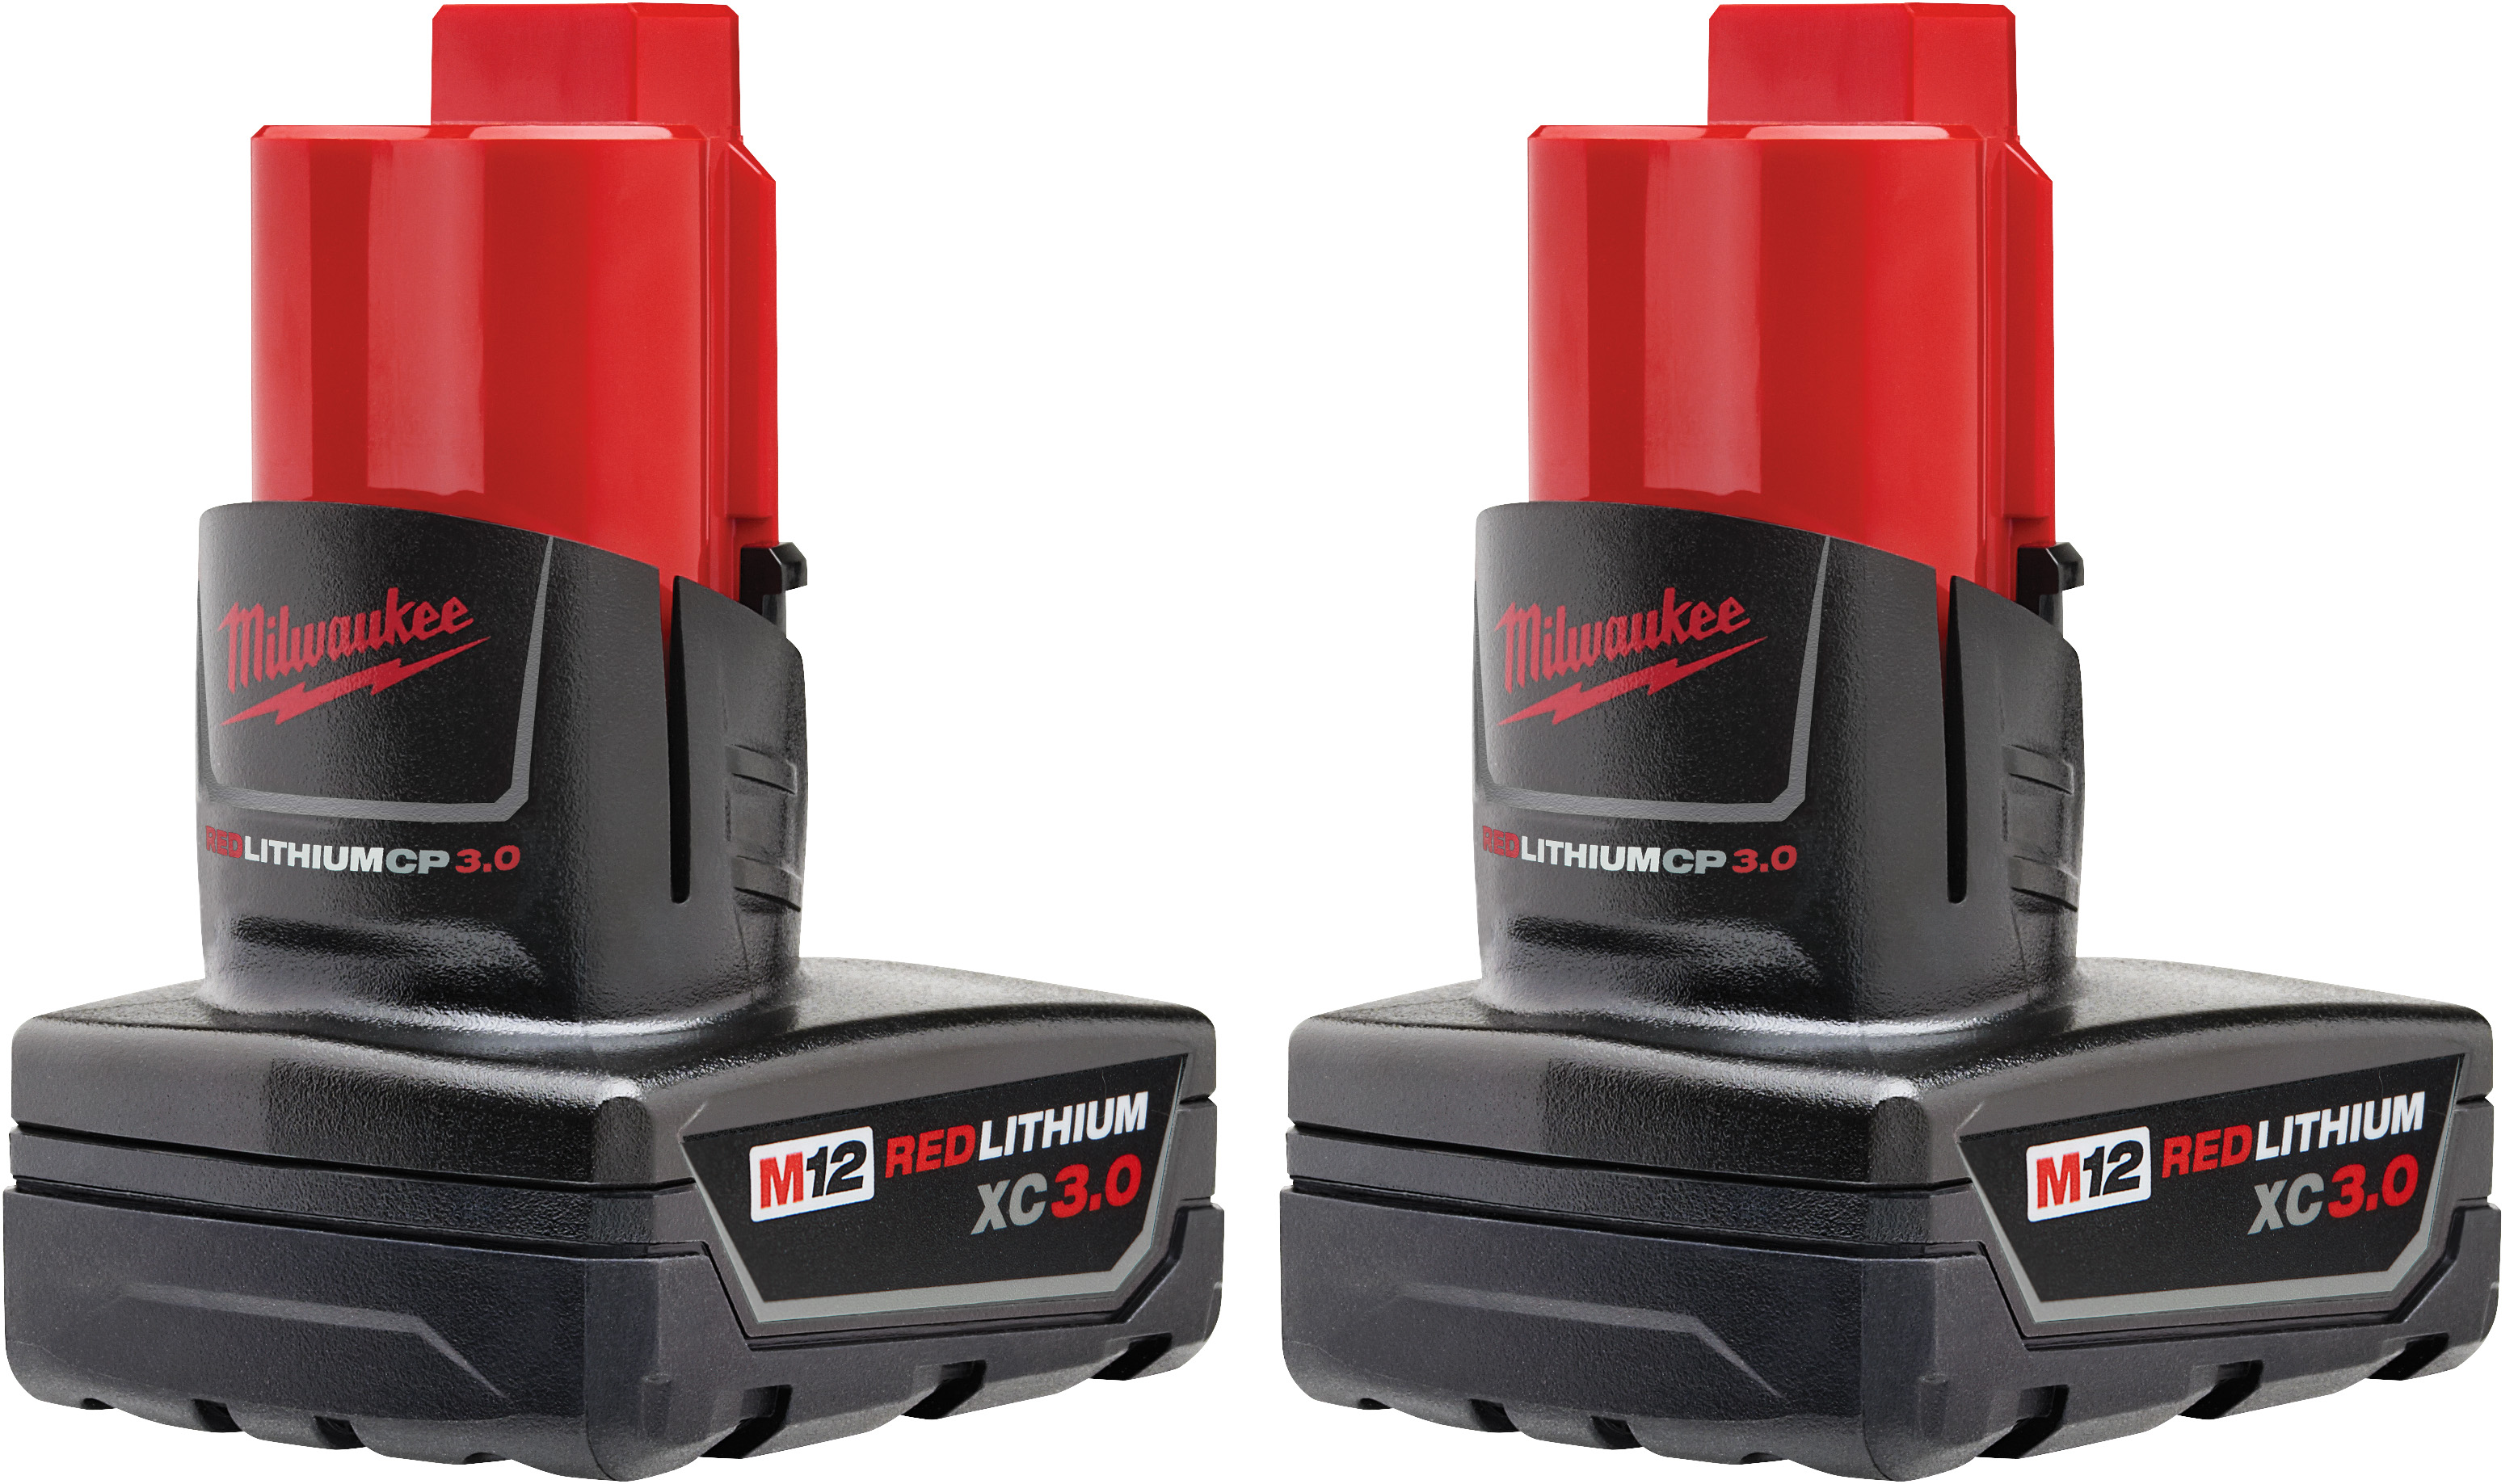 Improving run-time, power and speed; the M12™ XC high capacity REDLITHIUM™ battery will provide 2X the run-time and increased performance as compared to the M12™ compact REDLITHIUM™ battery pack in all M12™ tools. Milwaukee REDLITHIUM™ batteries are the next generation in lithium ion technology. Compatible with all products in the M12 cordless tool system, REDLITHIUM™ battery packs will provide unmatched runtime, performance and durability for the professional tradesman.